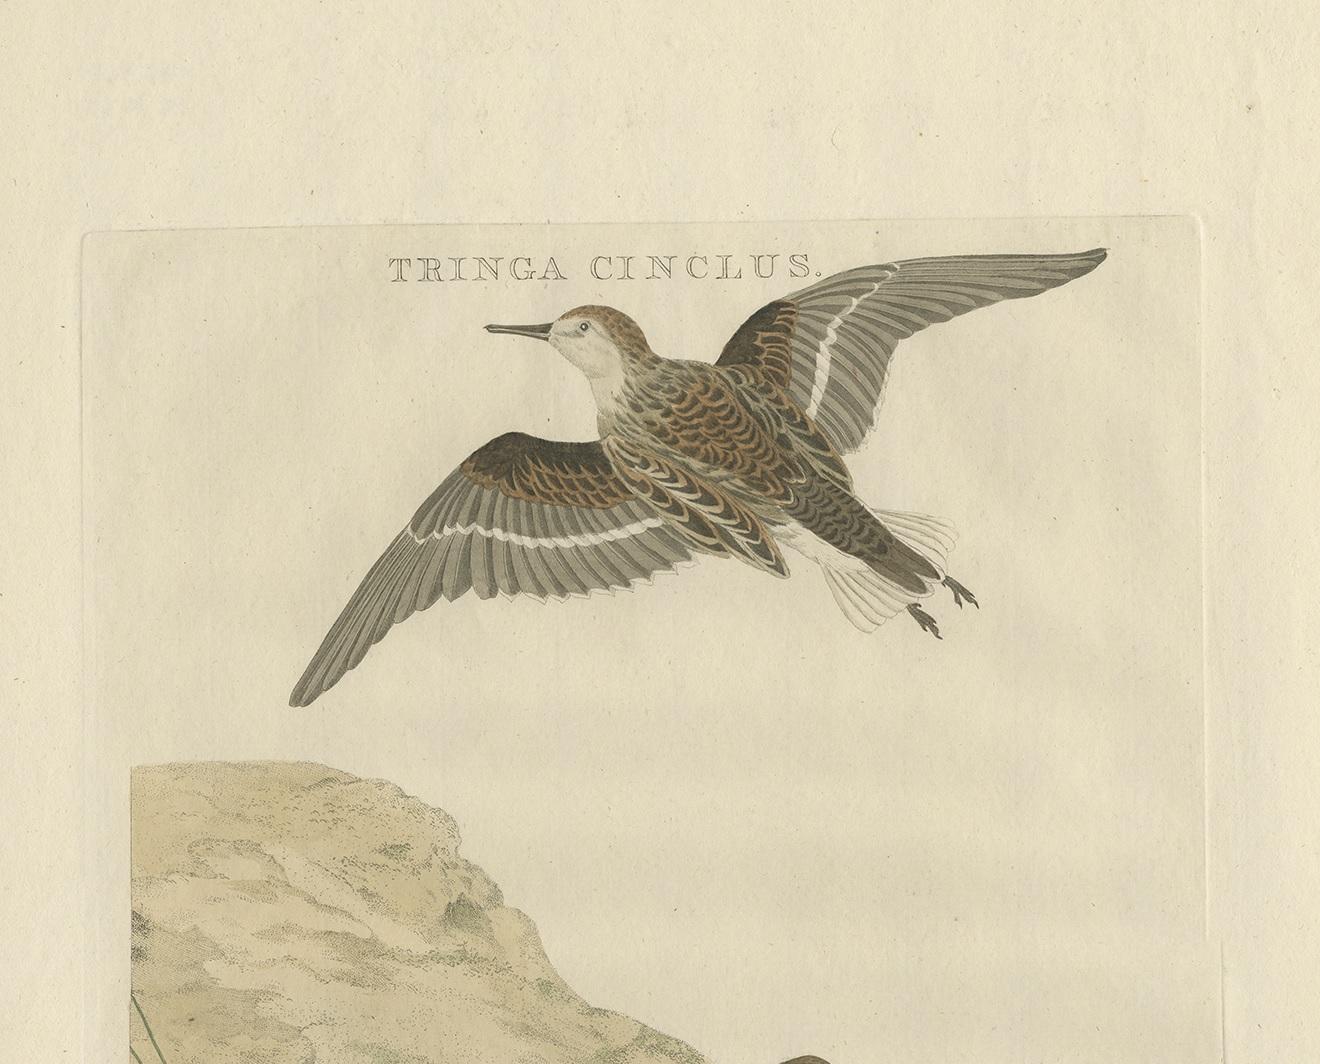 Antique print titled ‘Tringa Cinclus'. This print depicts the little stint (Dutch: kleine zandloper). The little stint (Calidris minuta) (or Erolia minuta), is a very small wader. It breeds in arctic Europe and Asia, and is a long-distance migrant,